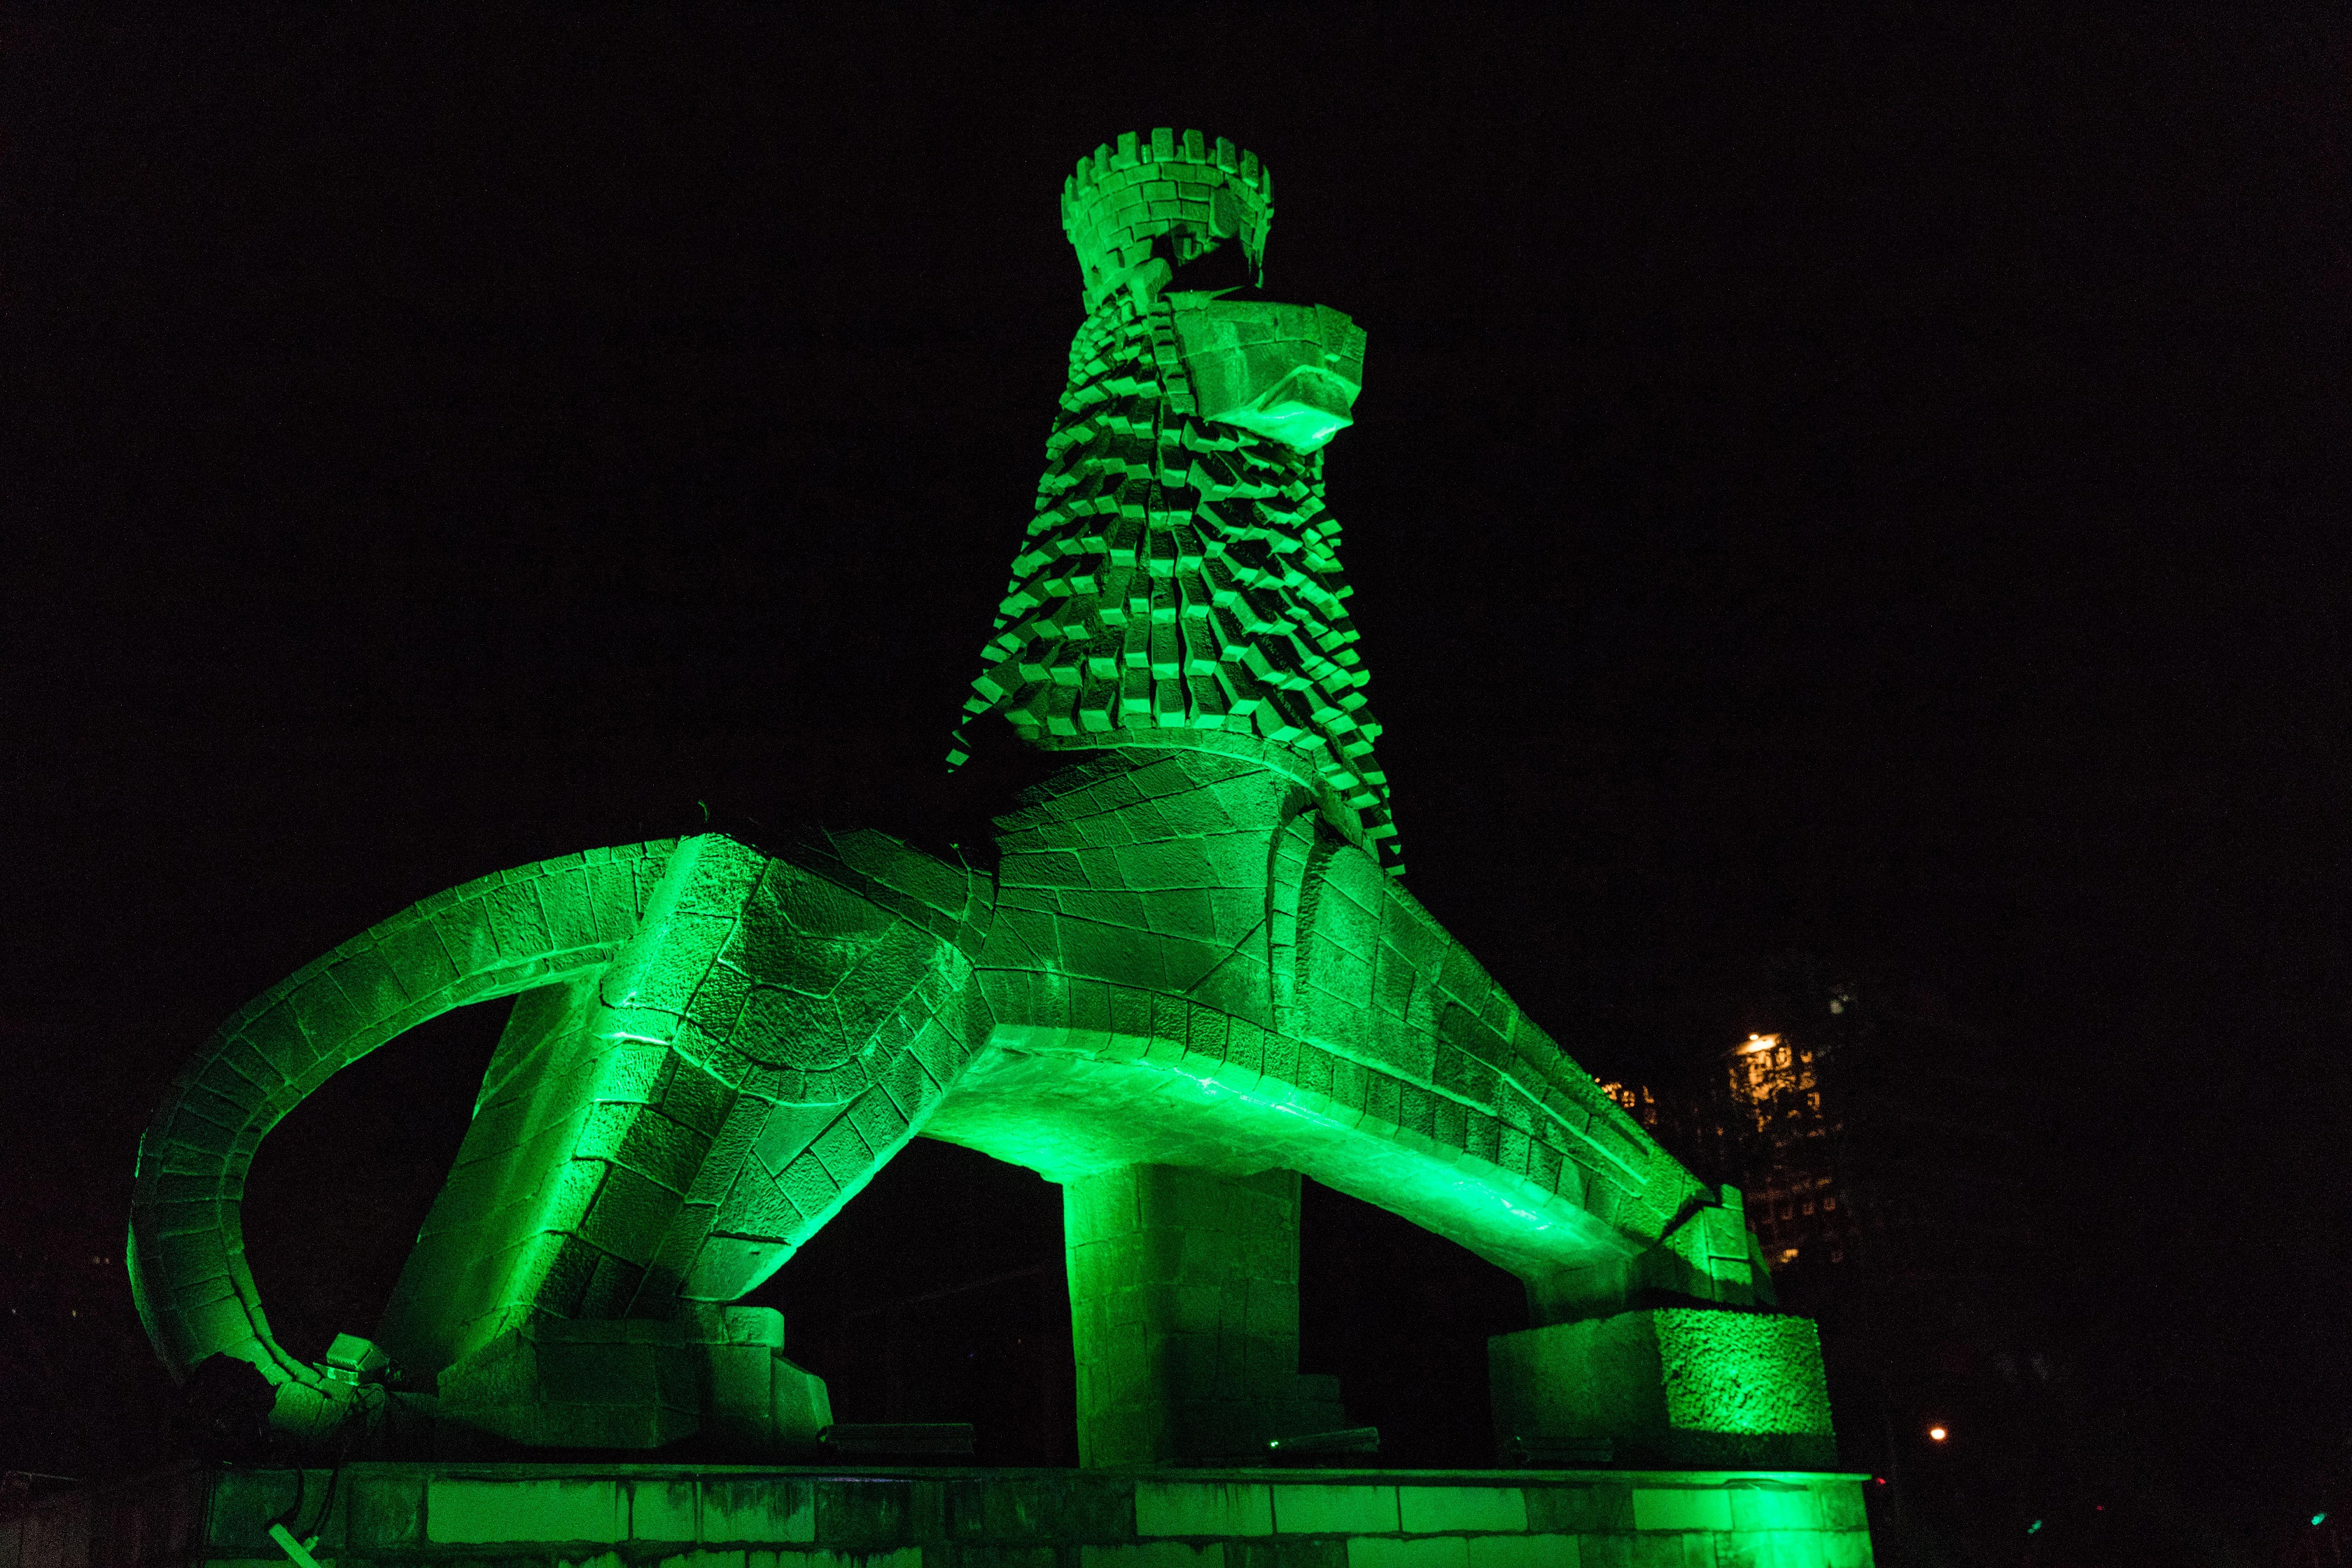 The Lion of Judah monument in Addis Ababa, Ethiopia